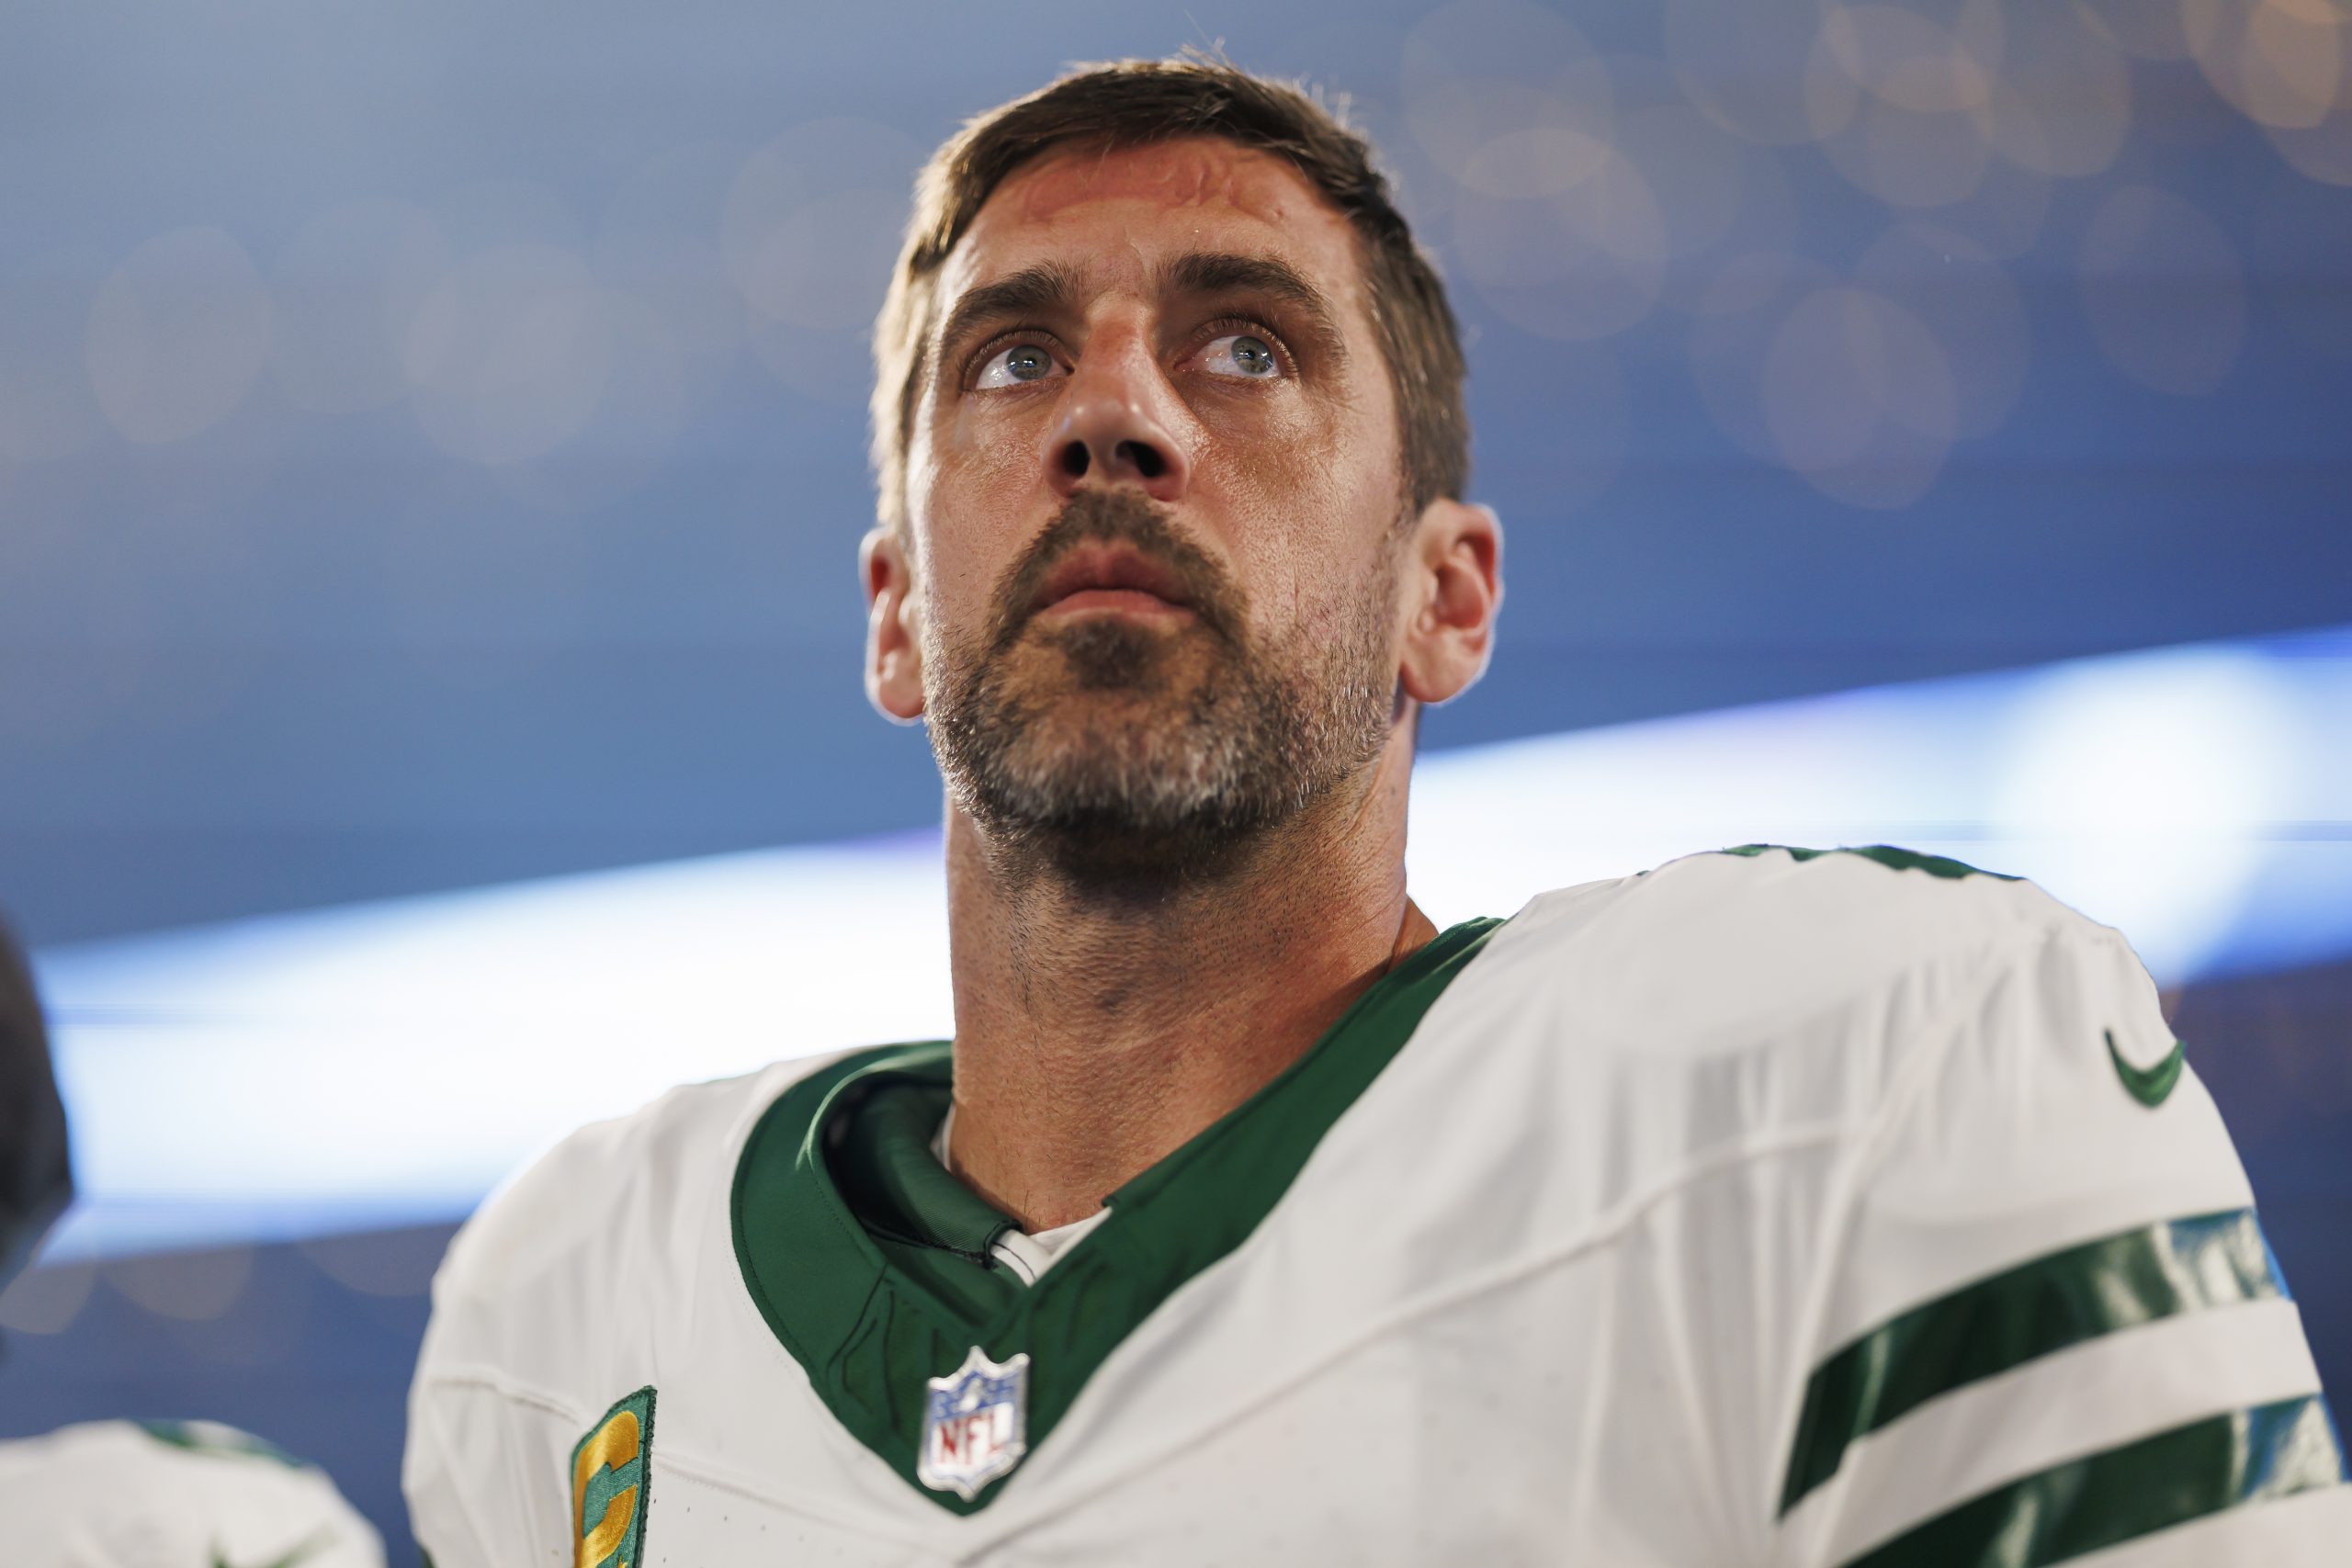 Aaron Rodgers #8 of the New York Jets looks on from the sideline prior to an NFL football game agai...